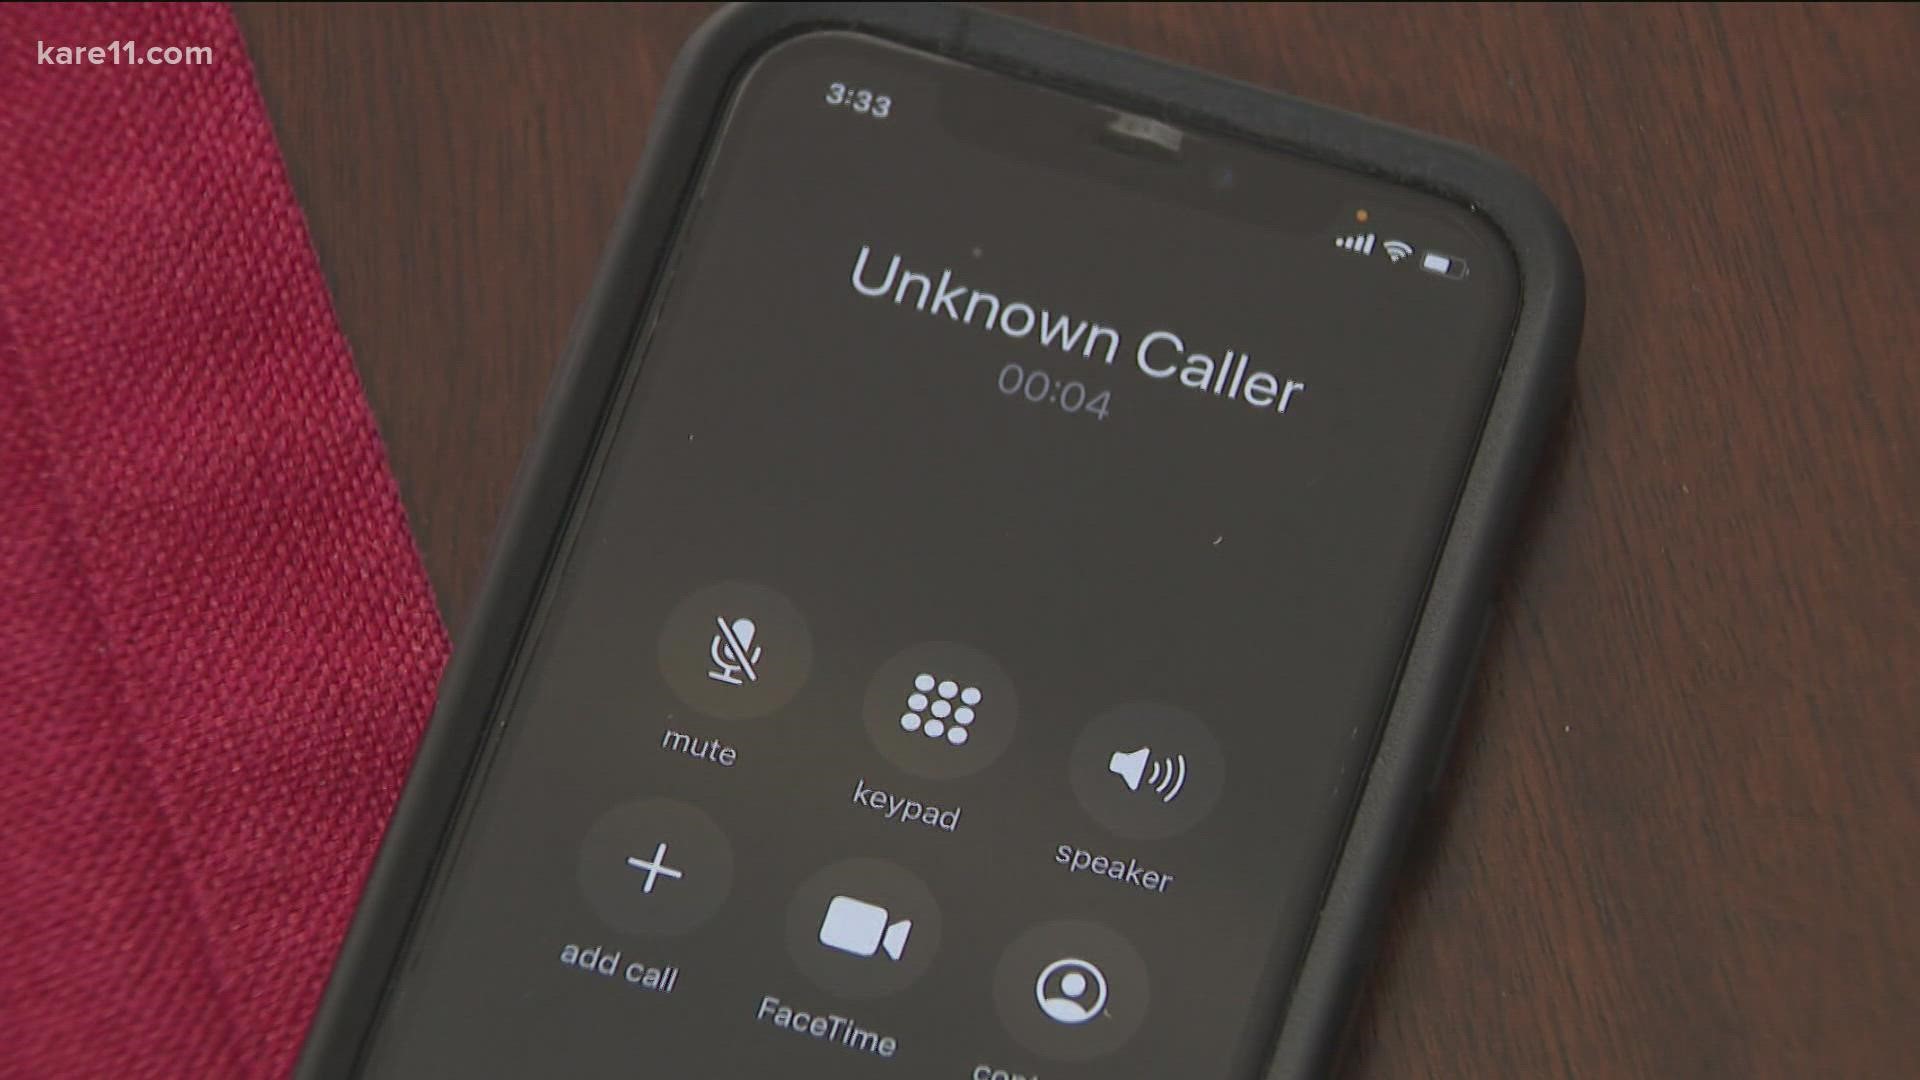 An Anoka County woman has turned the tables on the illegal callers, using a system to get them to pay her. Kristi VonDeylen has netted settlements worth $42,000.